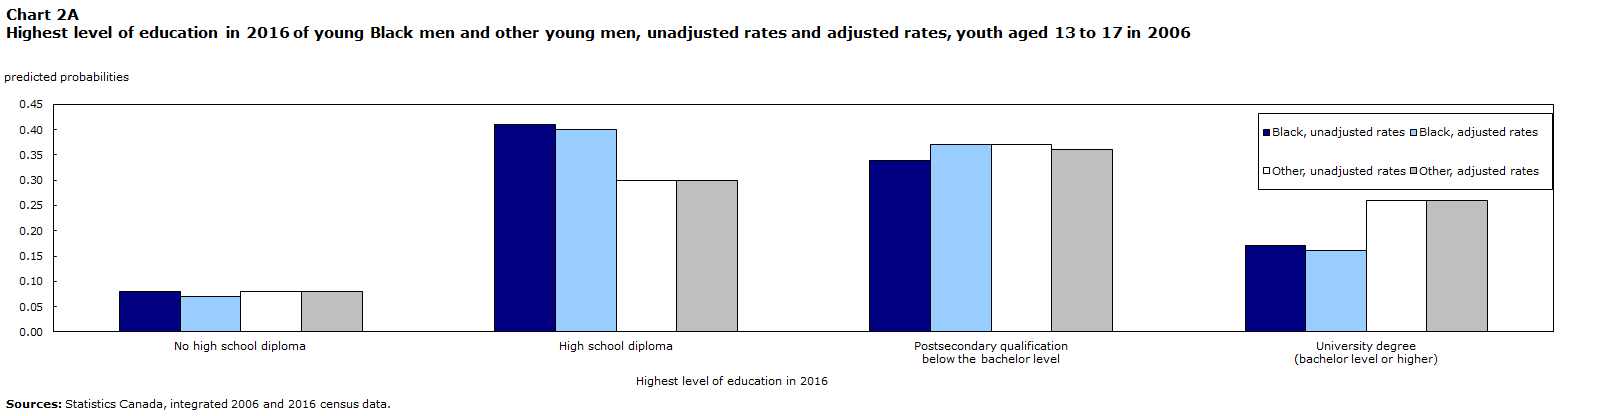 Chart 2A Highest level of education in 2016 of young Black men and other young men, unadjusted rates and adjusted rates, youth aged 13 to 17 in 2006